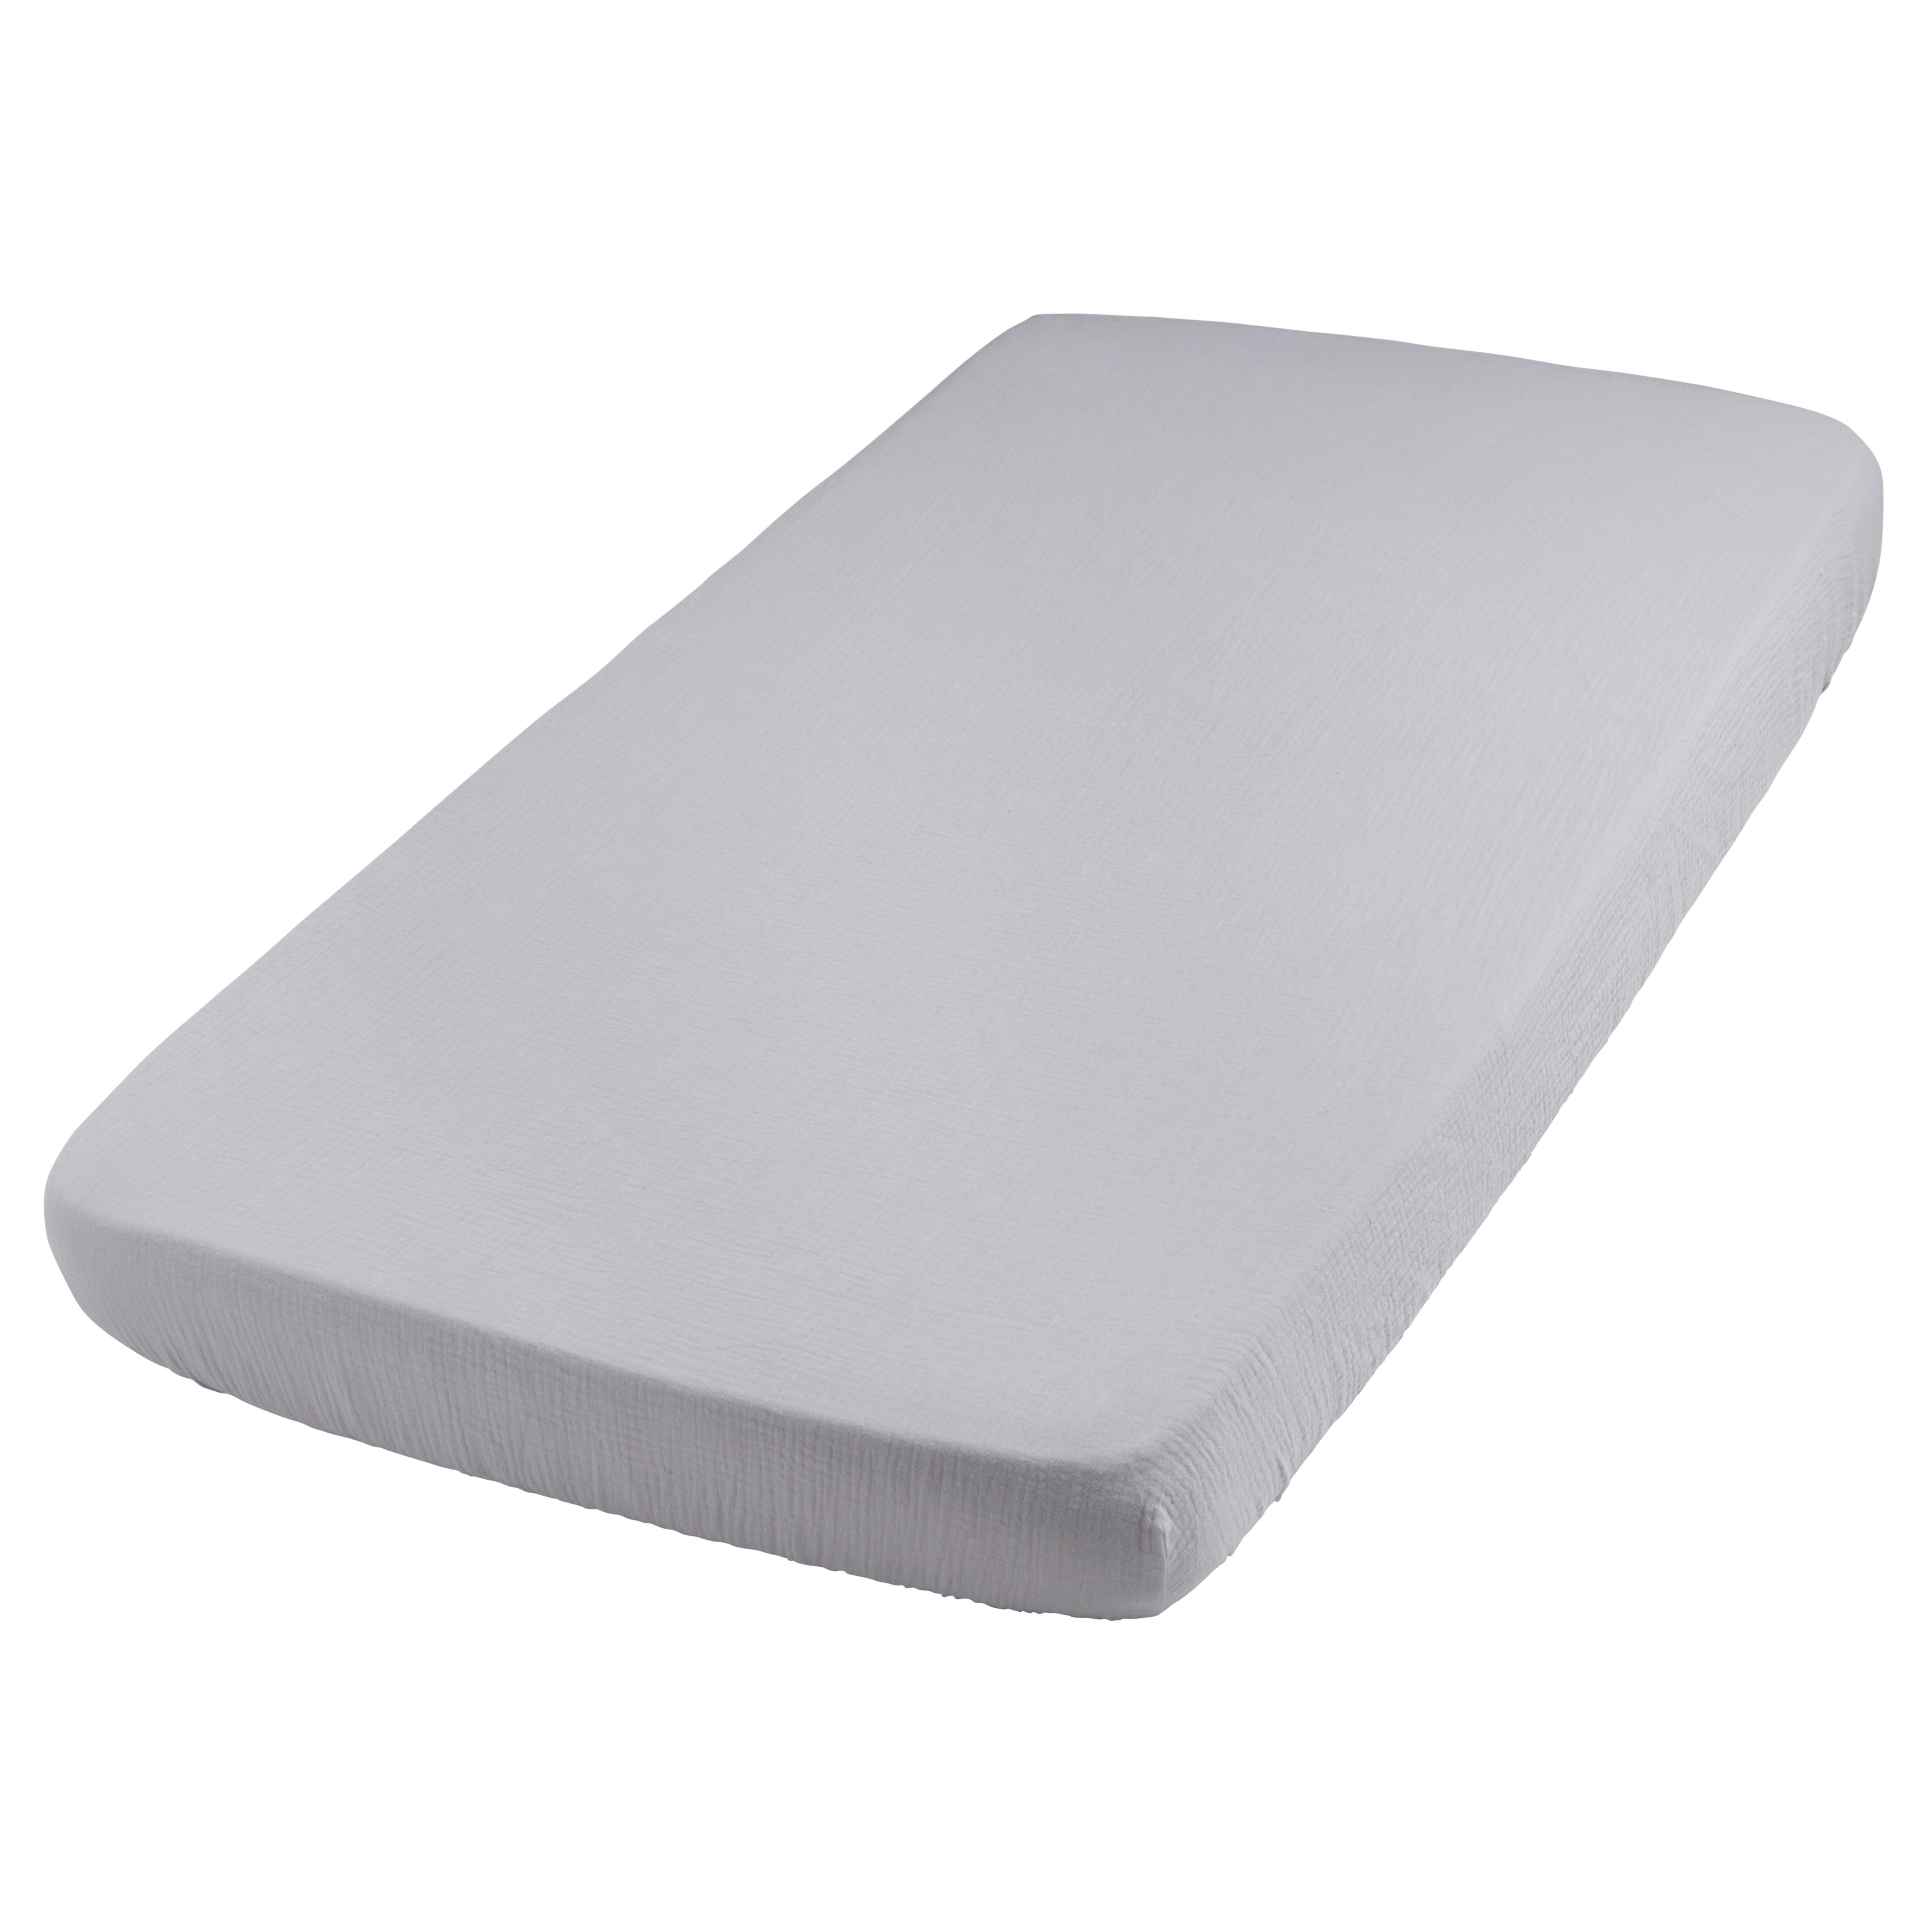 Fitted sheet Breeze grey - 60x120